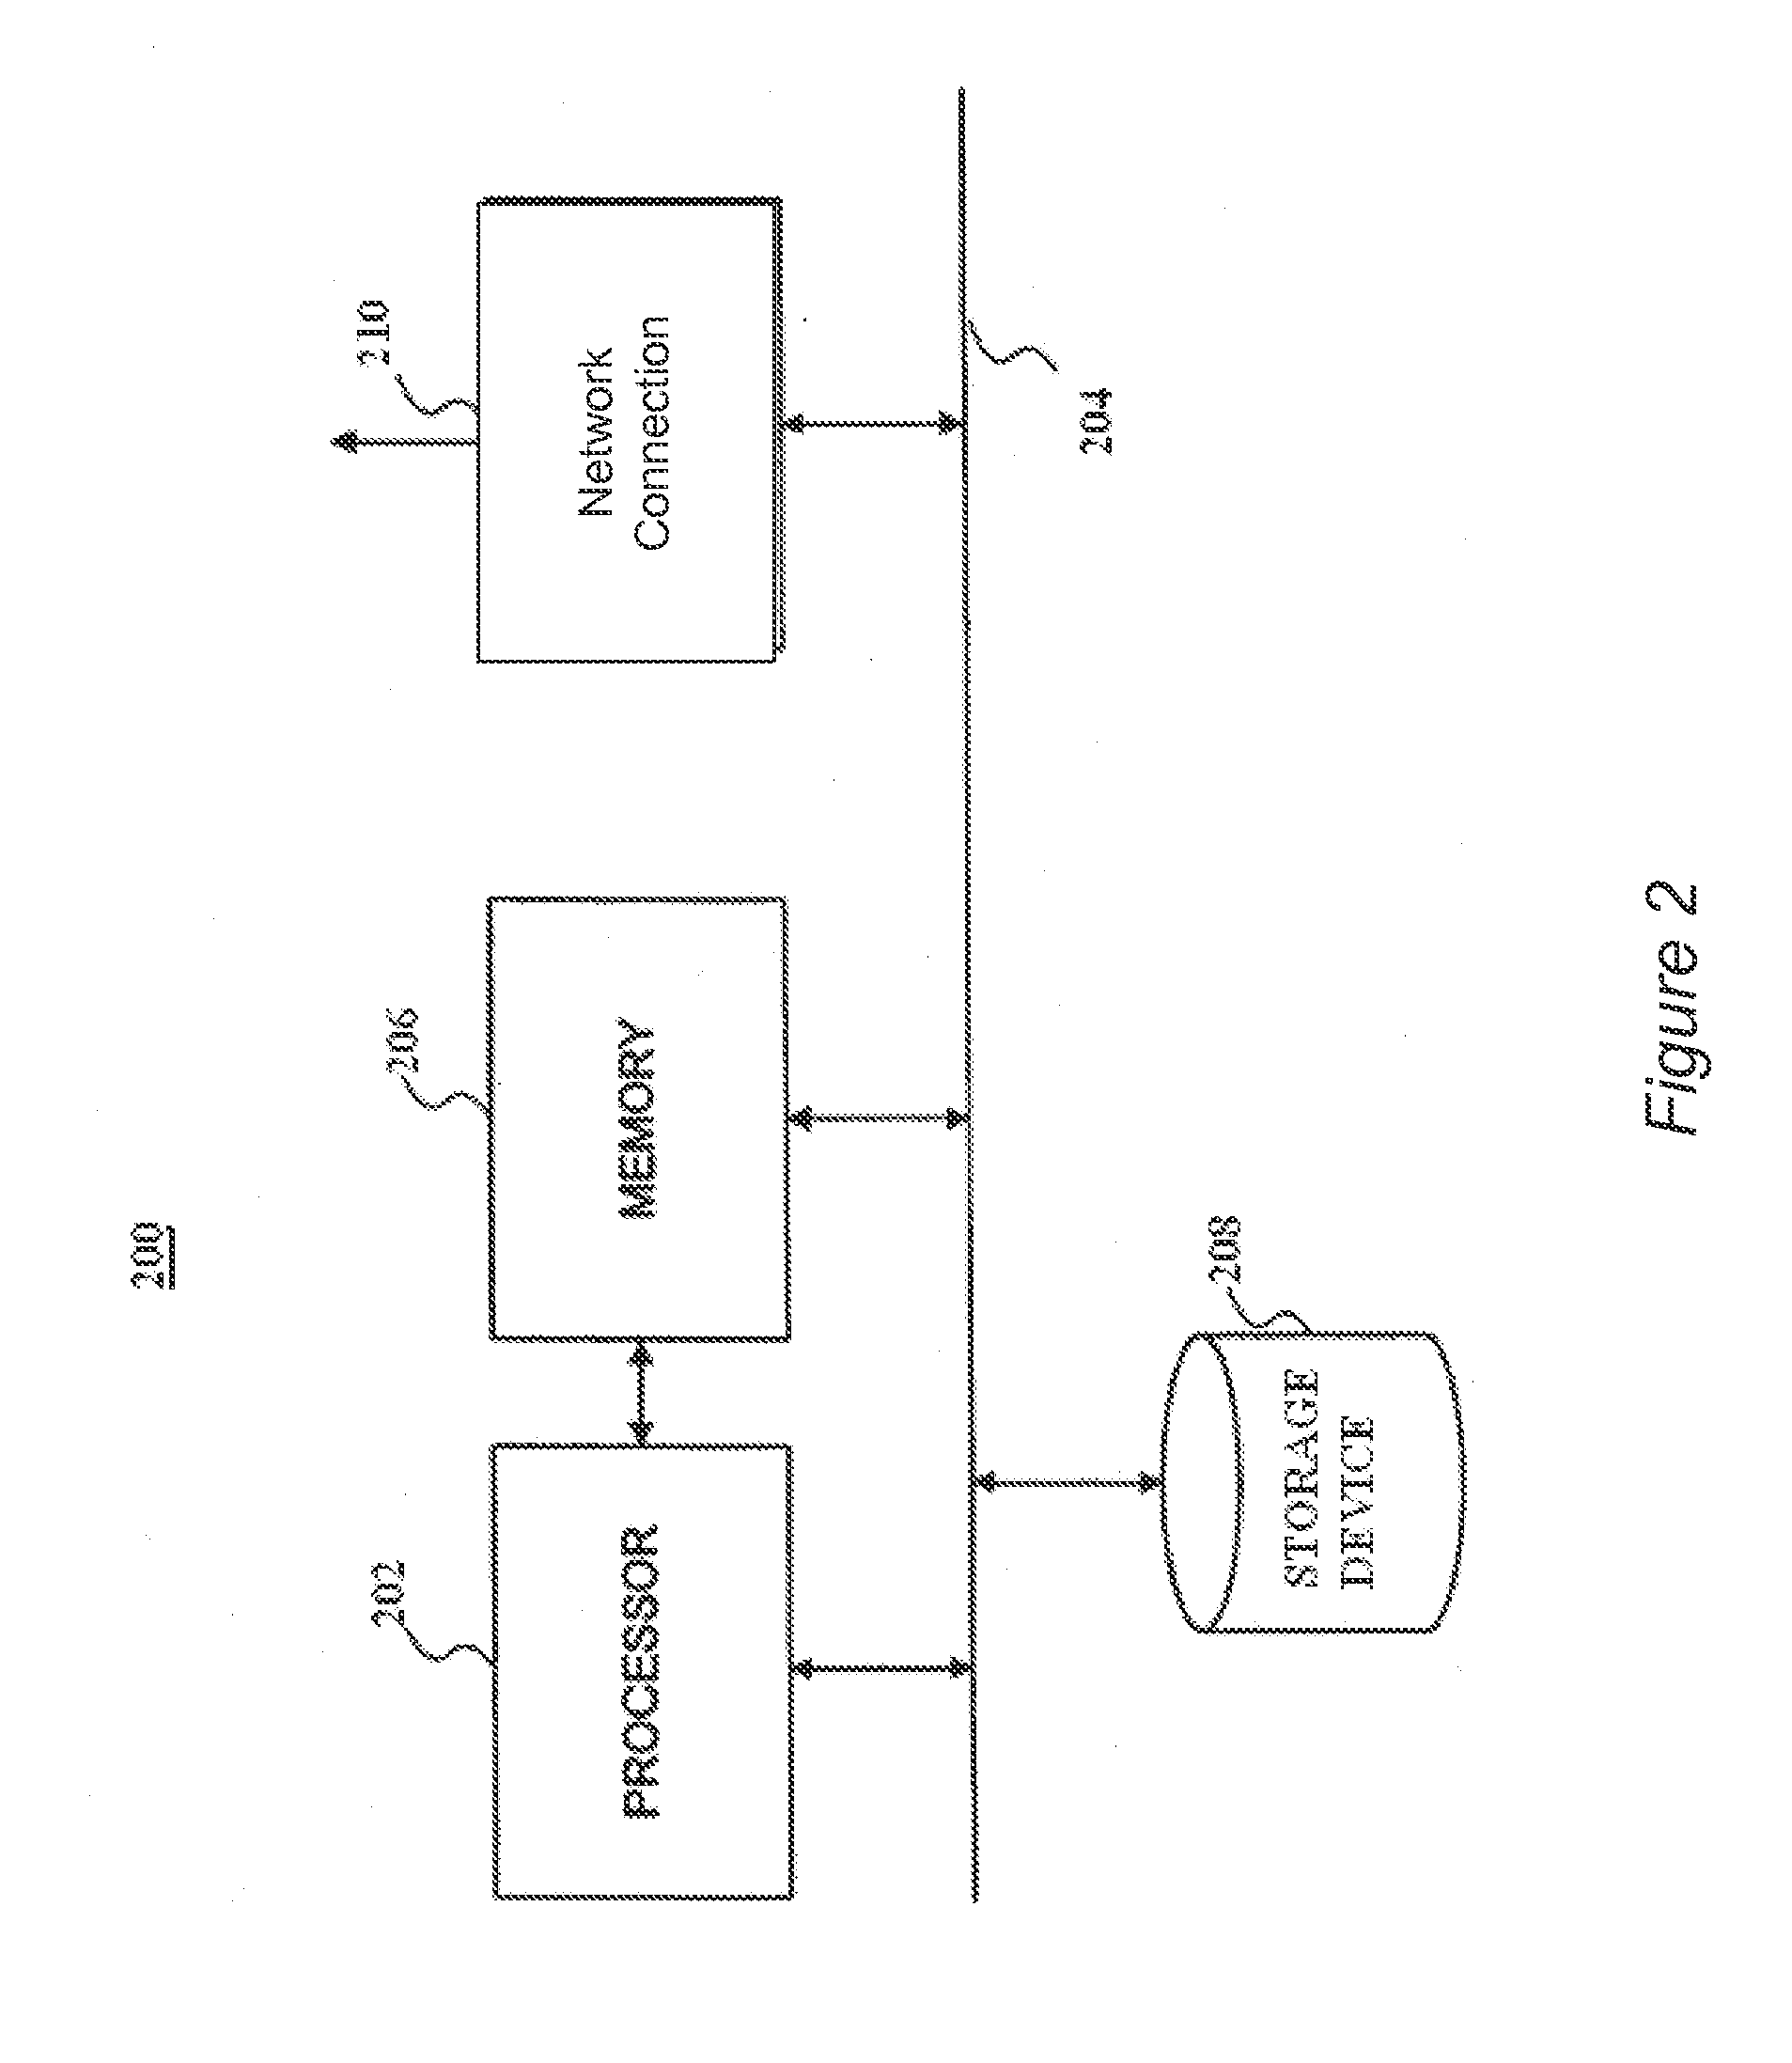 Flight planning system and method using four-dimensional search